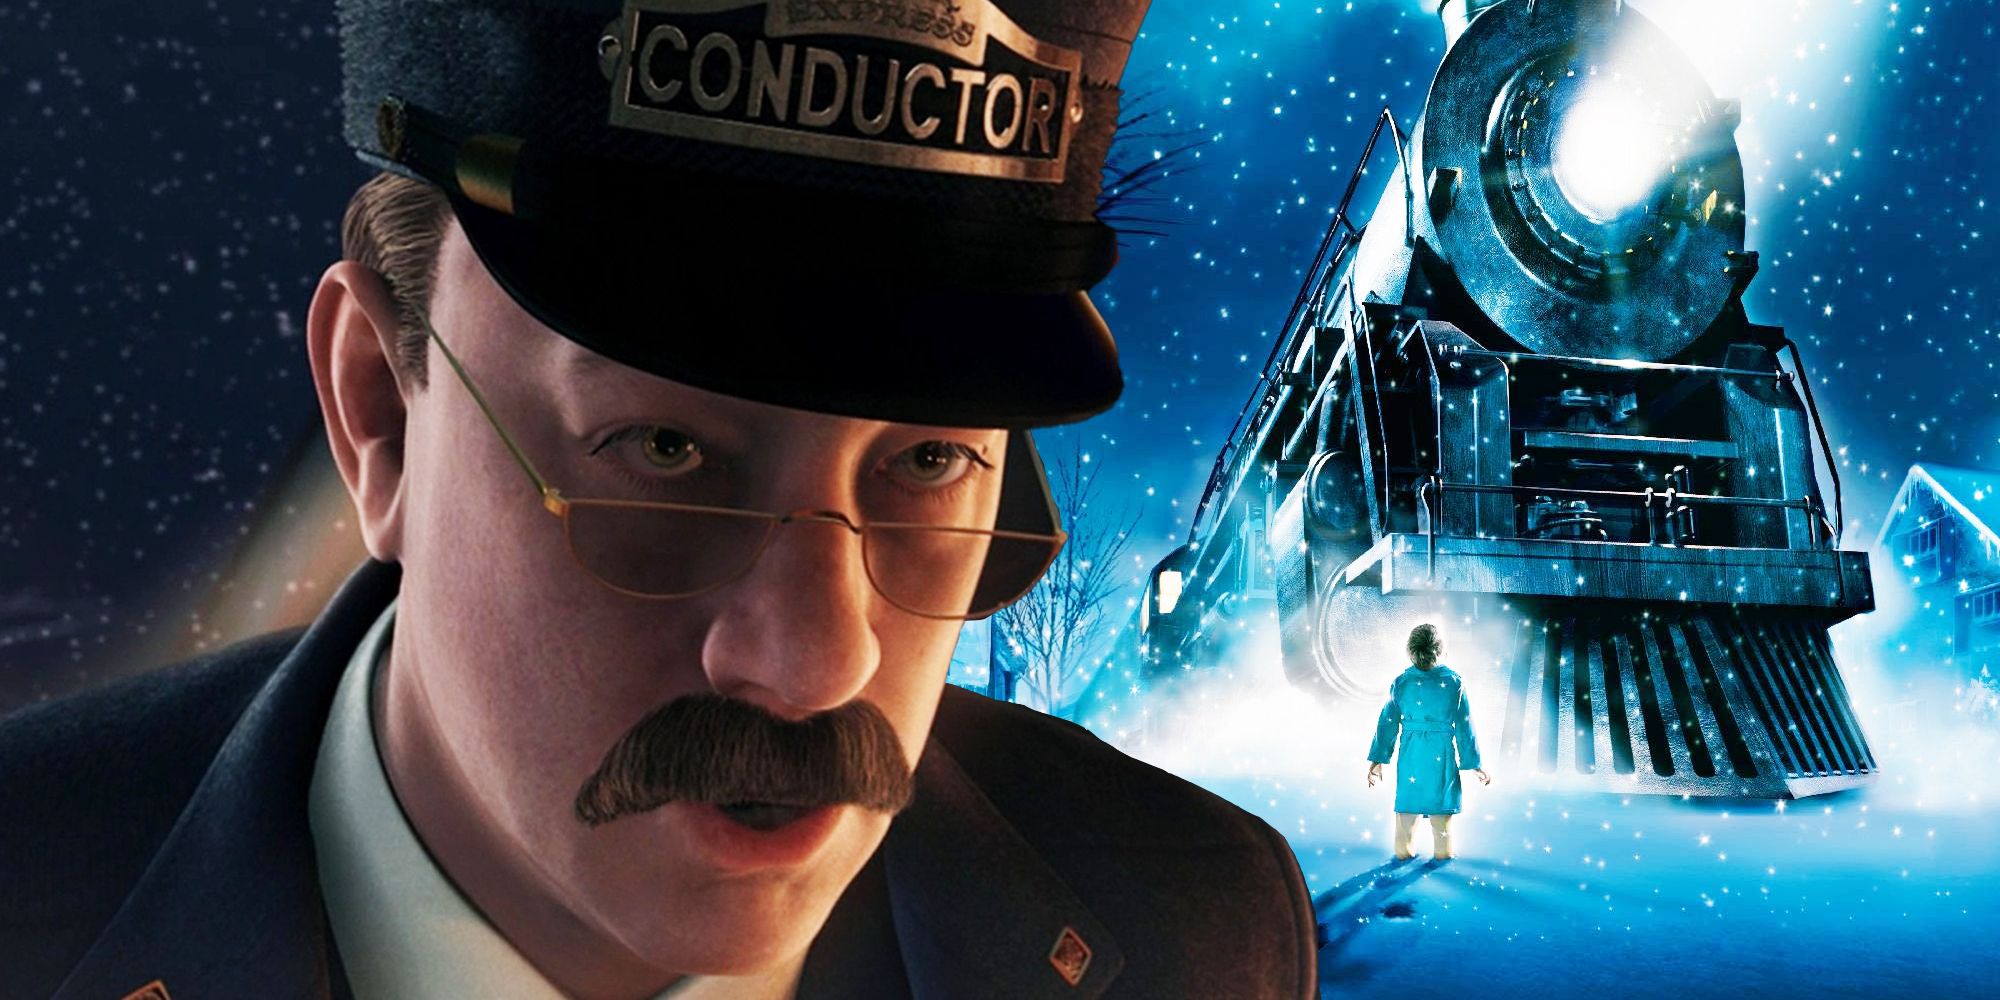 The Conductor and the Polar Express train